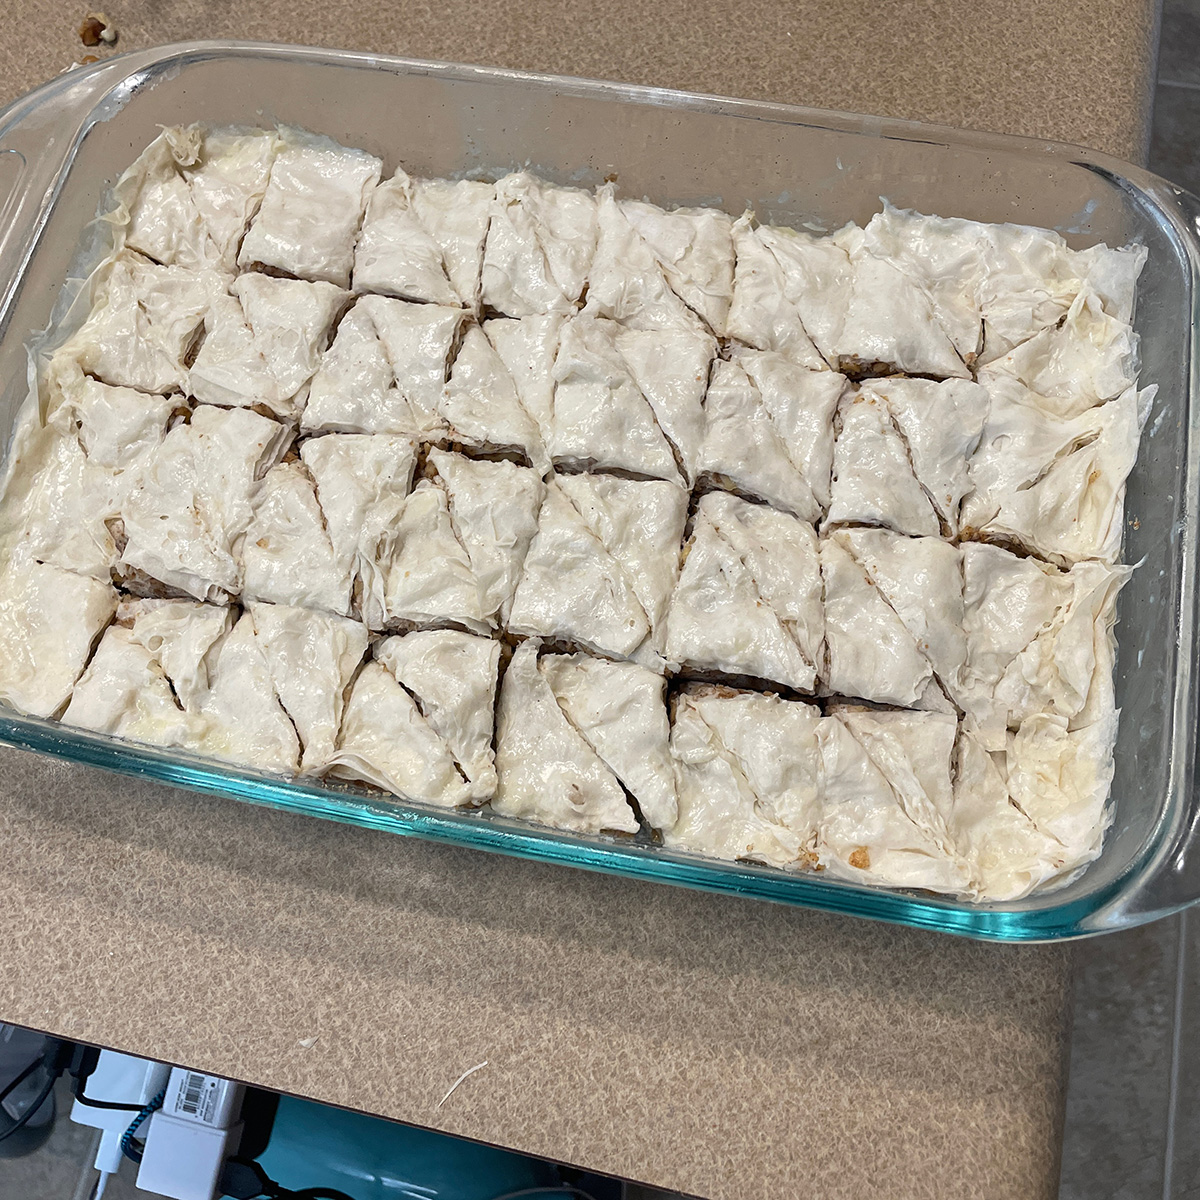 Baklava - Cut and ready for oven
